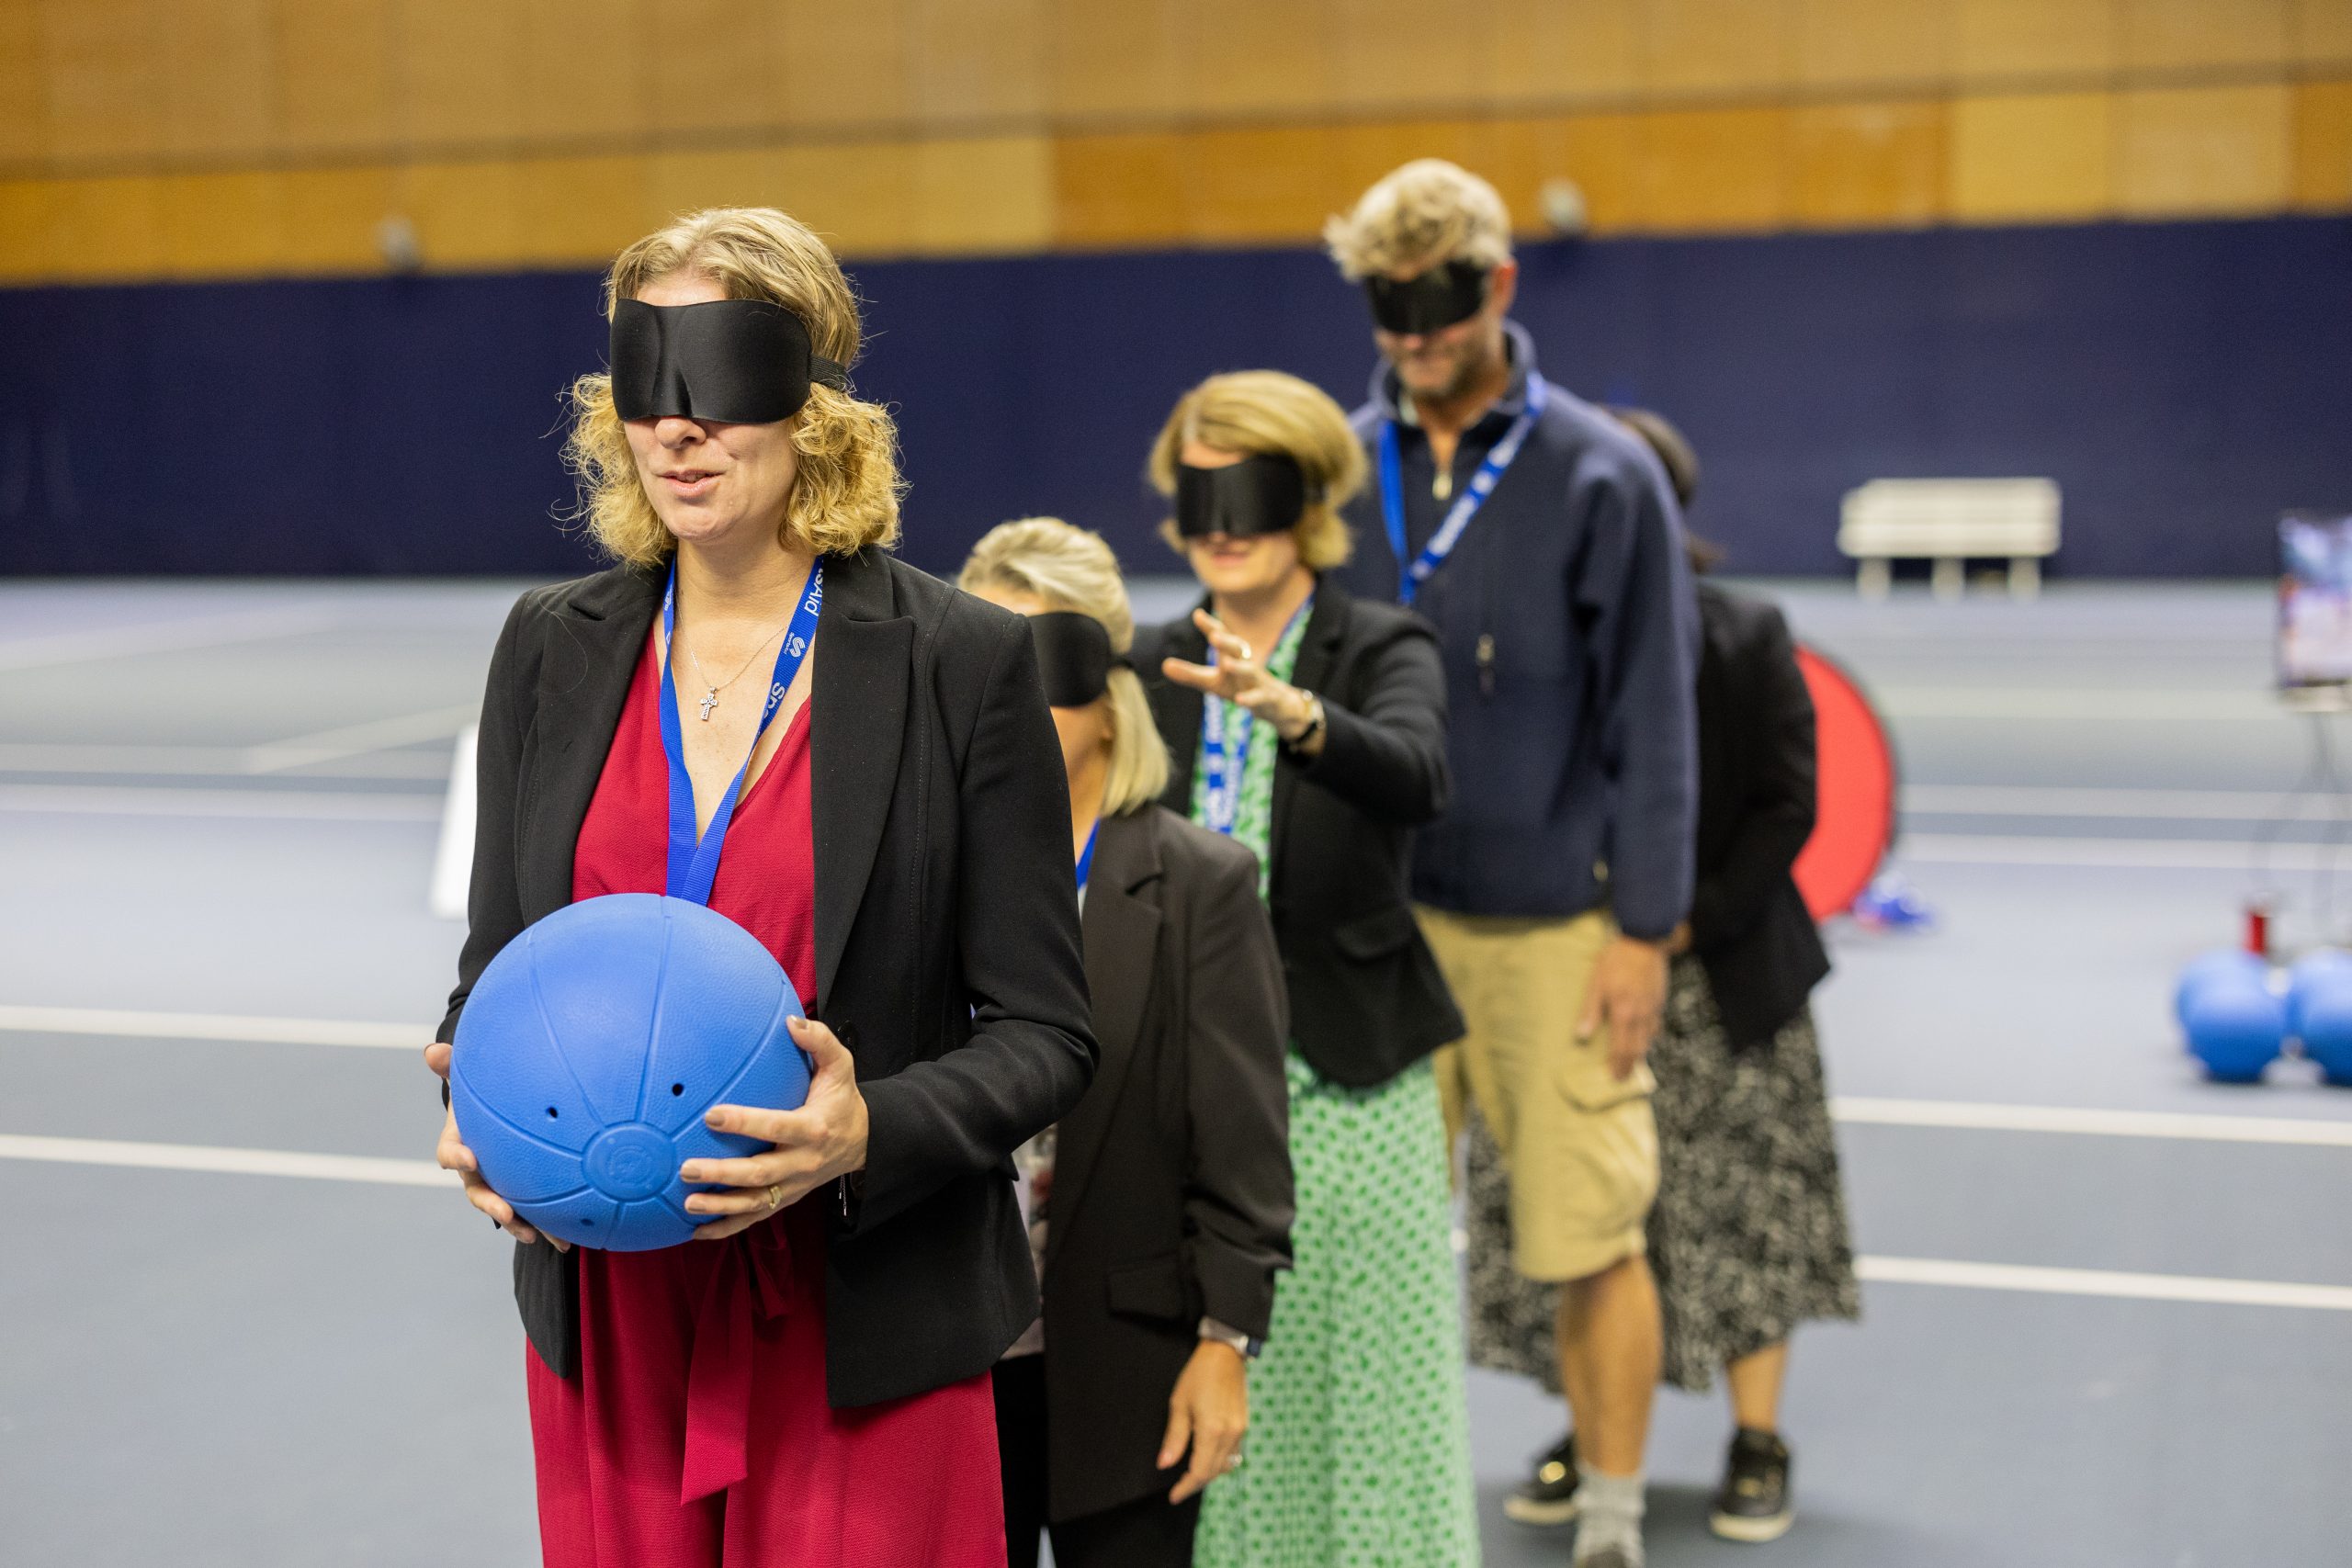 Men and women in smart corporate clothes stand in a line. They are wearing black eye shades and the woman at the front holds a goalball ready to play a game of 'over and under'